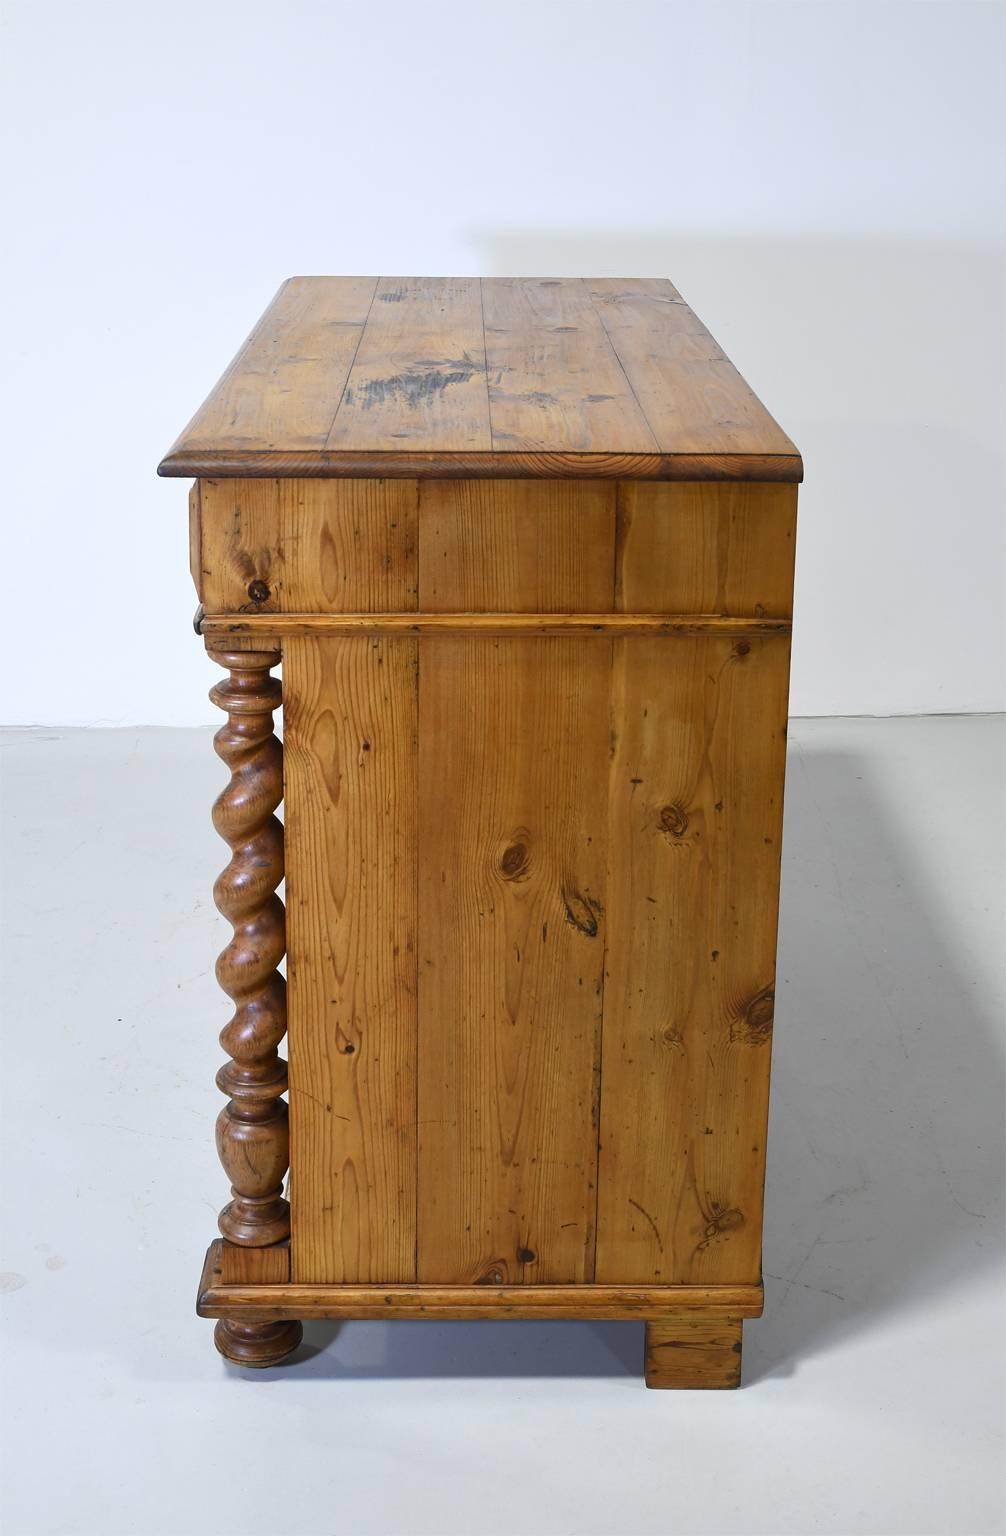 Scandinavian 19th Century Danish Sideboard or Buffet in Pine with Rope-Turned Columns